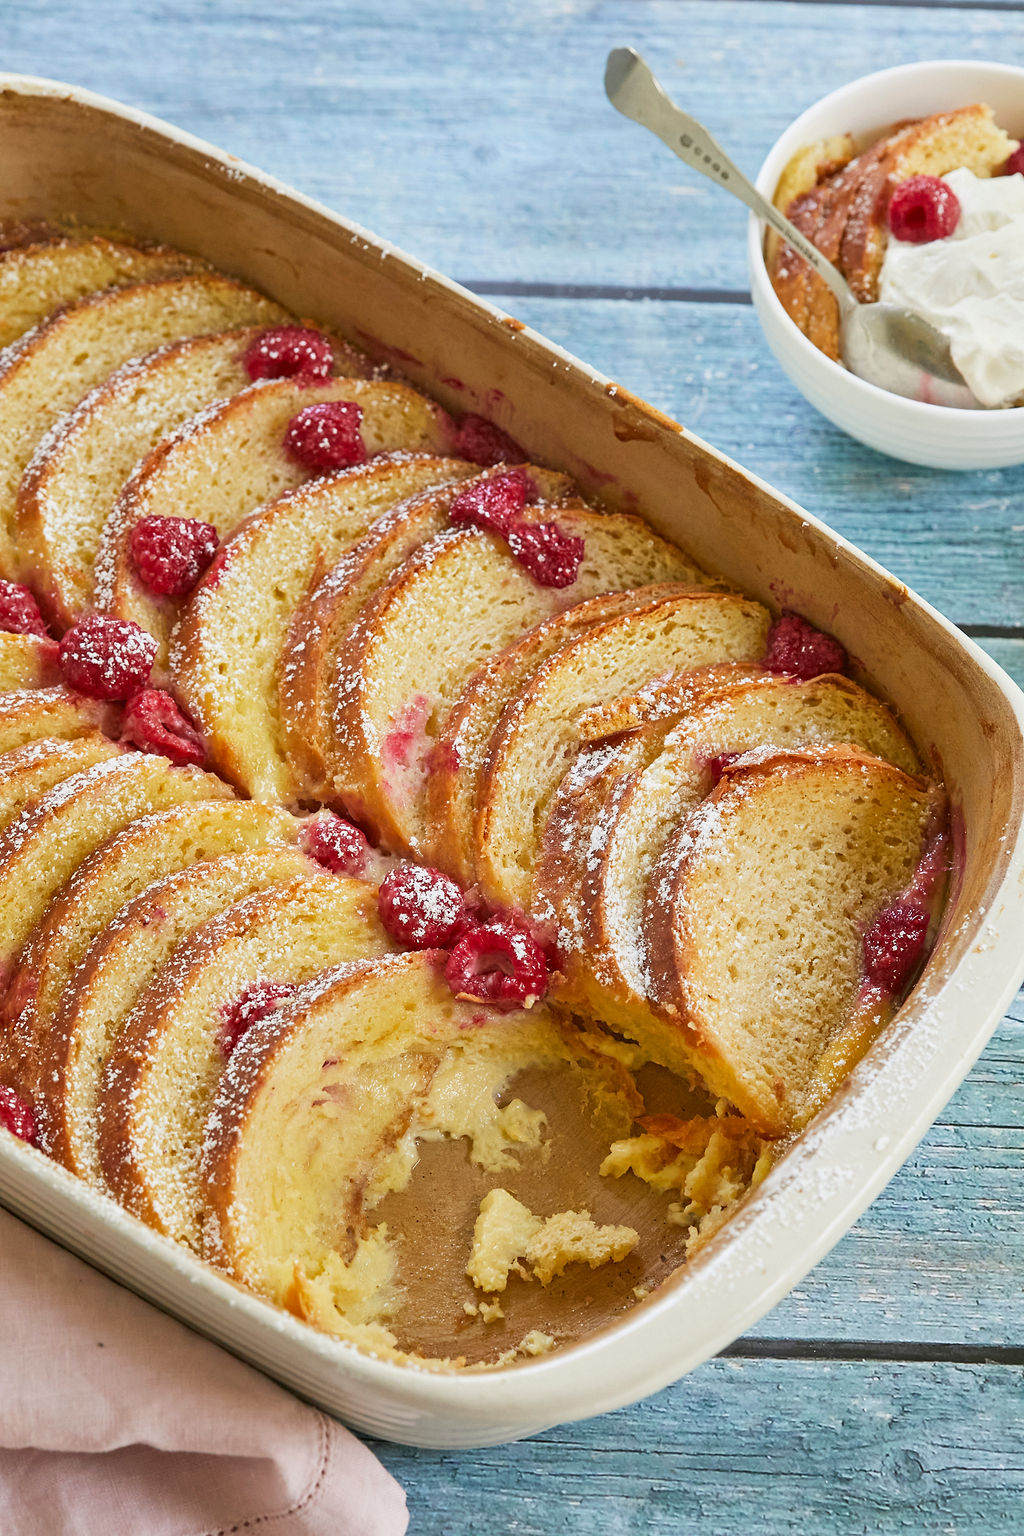 A serving of White Chocolate, Whiskey, and Raspberry Bread Pudding.